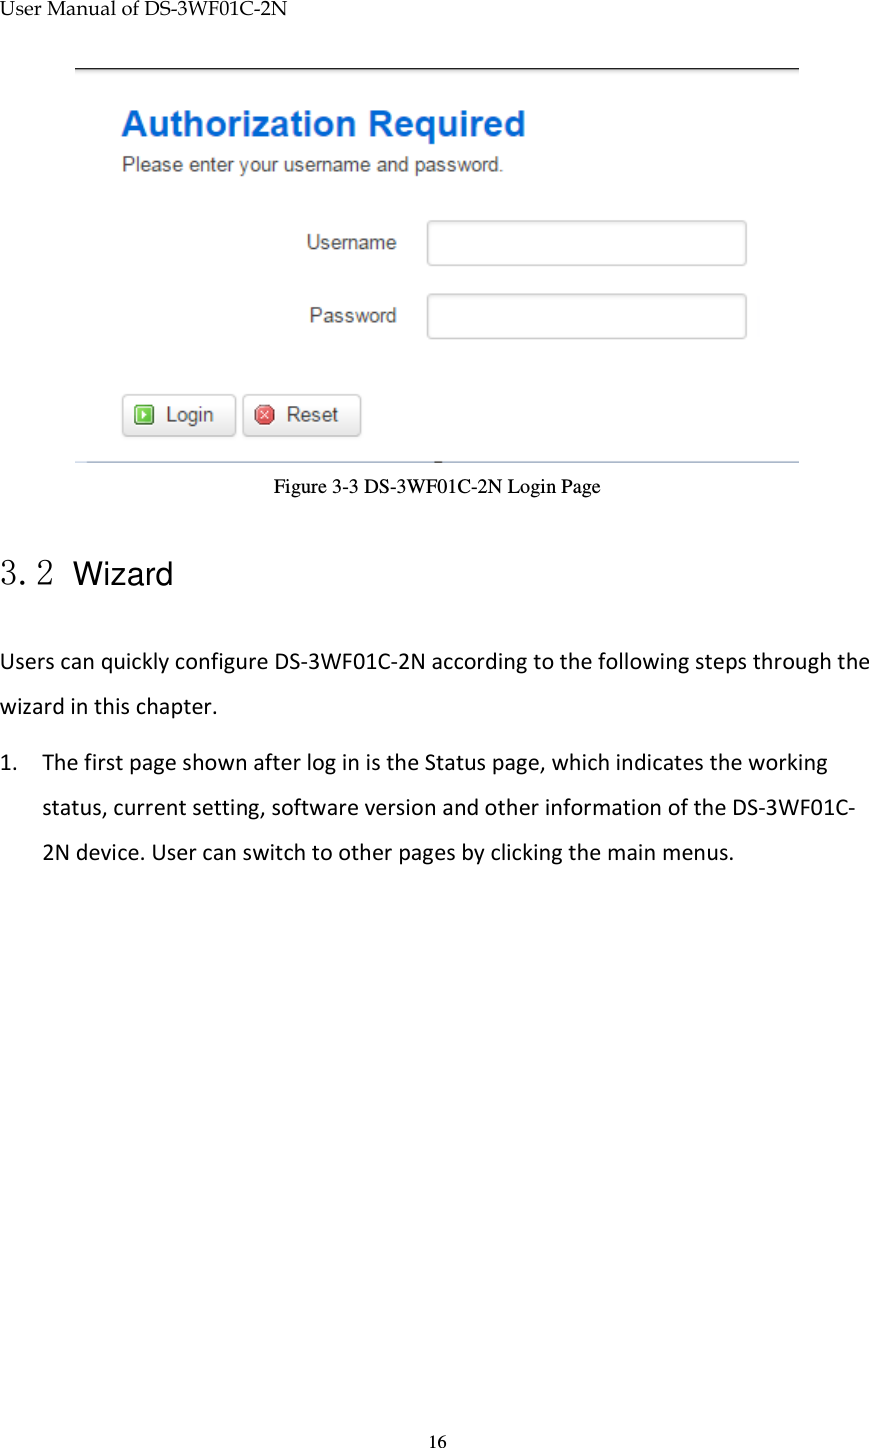 User Manual of DS-3WF01C-2N   16 Figure 3-3 DS-3WF01C-2N Login Page  3.2 Wizard Users can quickly configure DS-3WF01C-2N according to the following steps through the wizard in this chapter. 1. The first page shown after log in is the Status page, which indicates the working status, current setting, software version and other information of the DS-3WF01C-2N device. User can switch to other pages by clicking the main menus. 